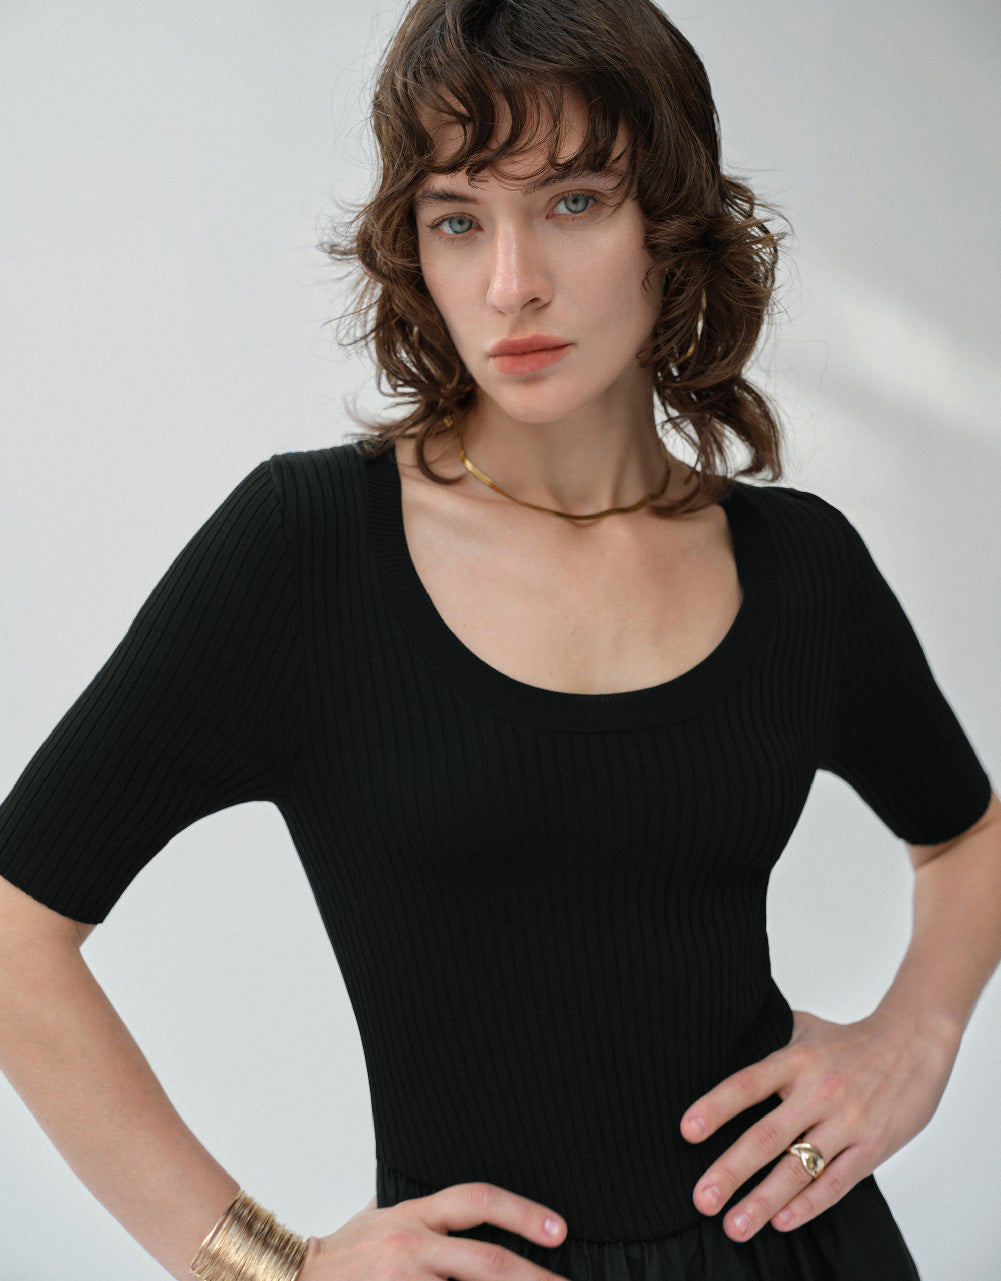 Crew Neck Knitted Dress